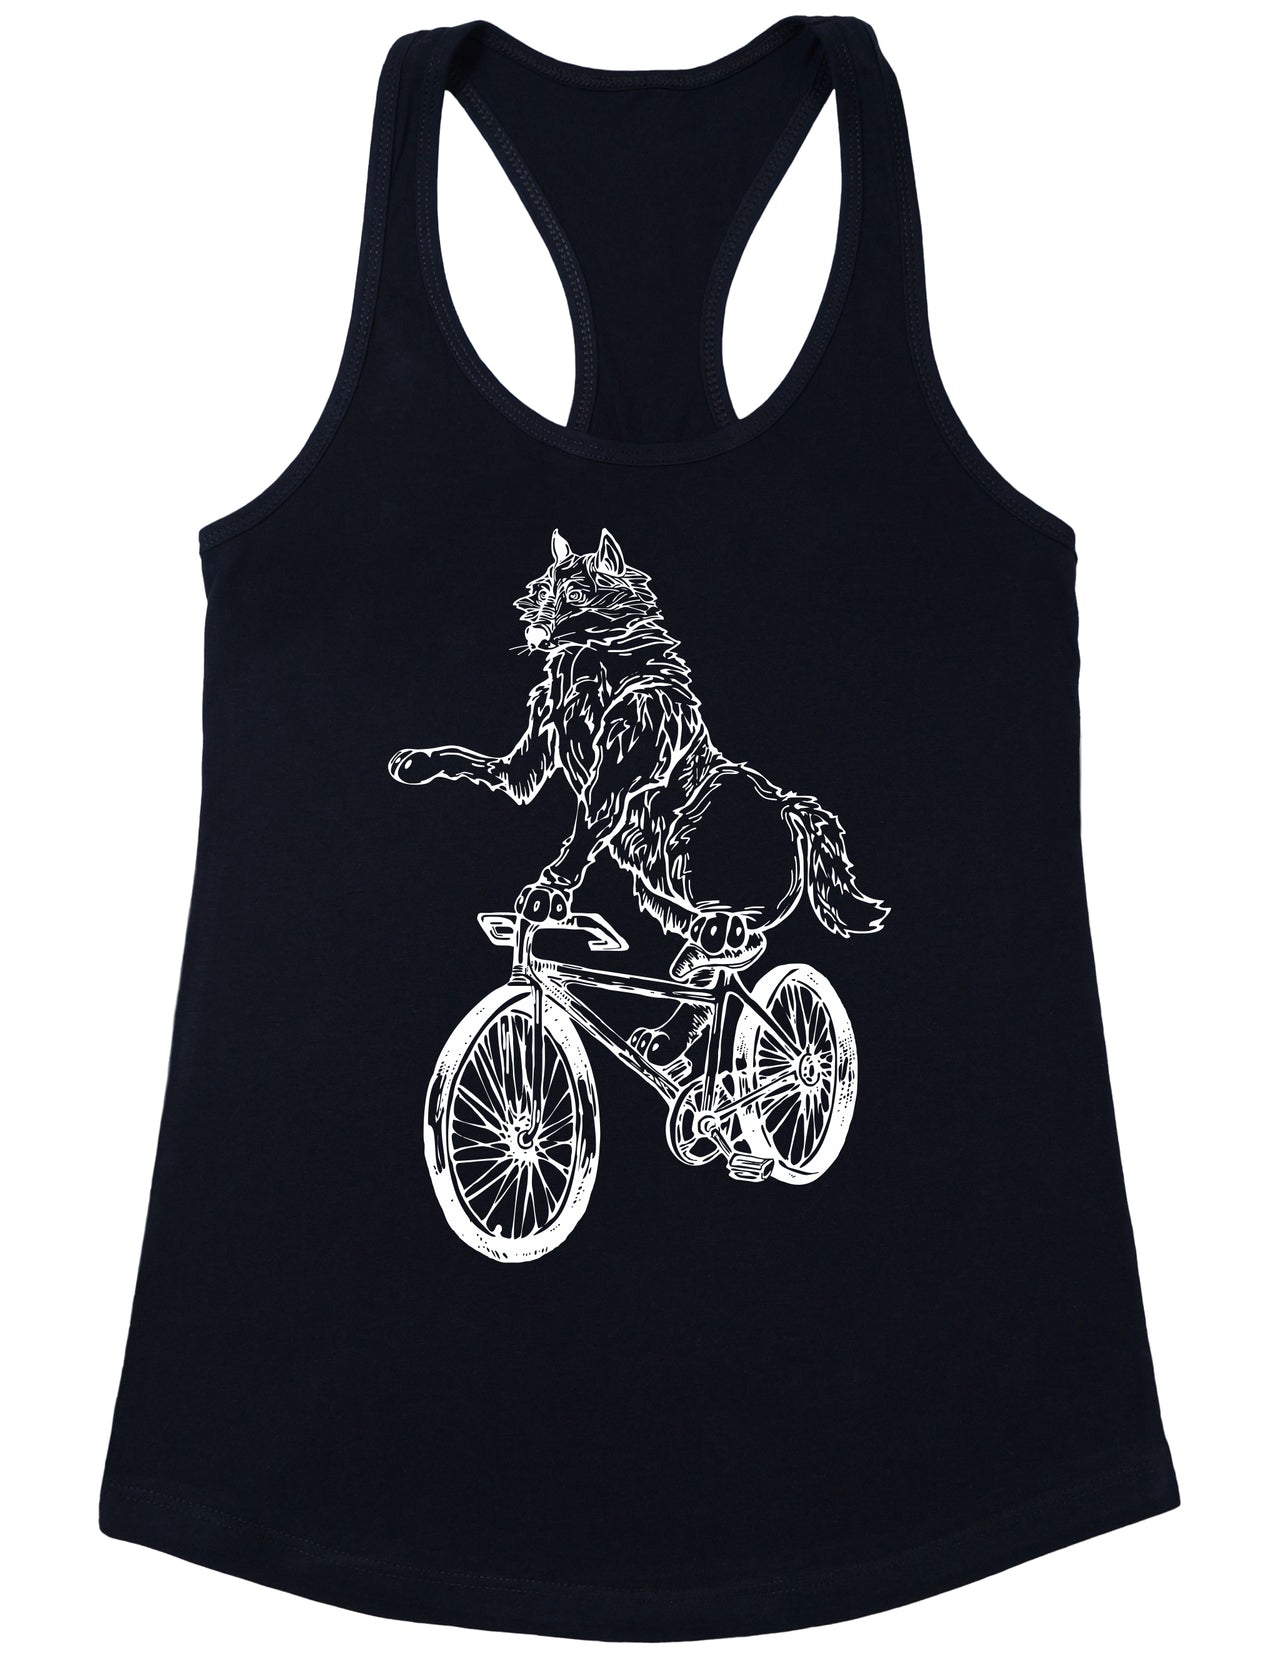 SEEMBO Wolf Cycling Bicycle Women's Poly-Cotton Tank Top